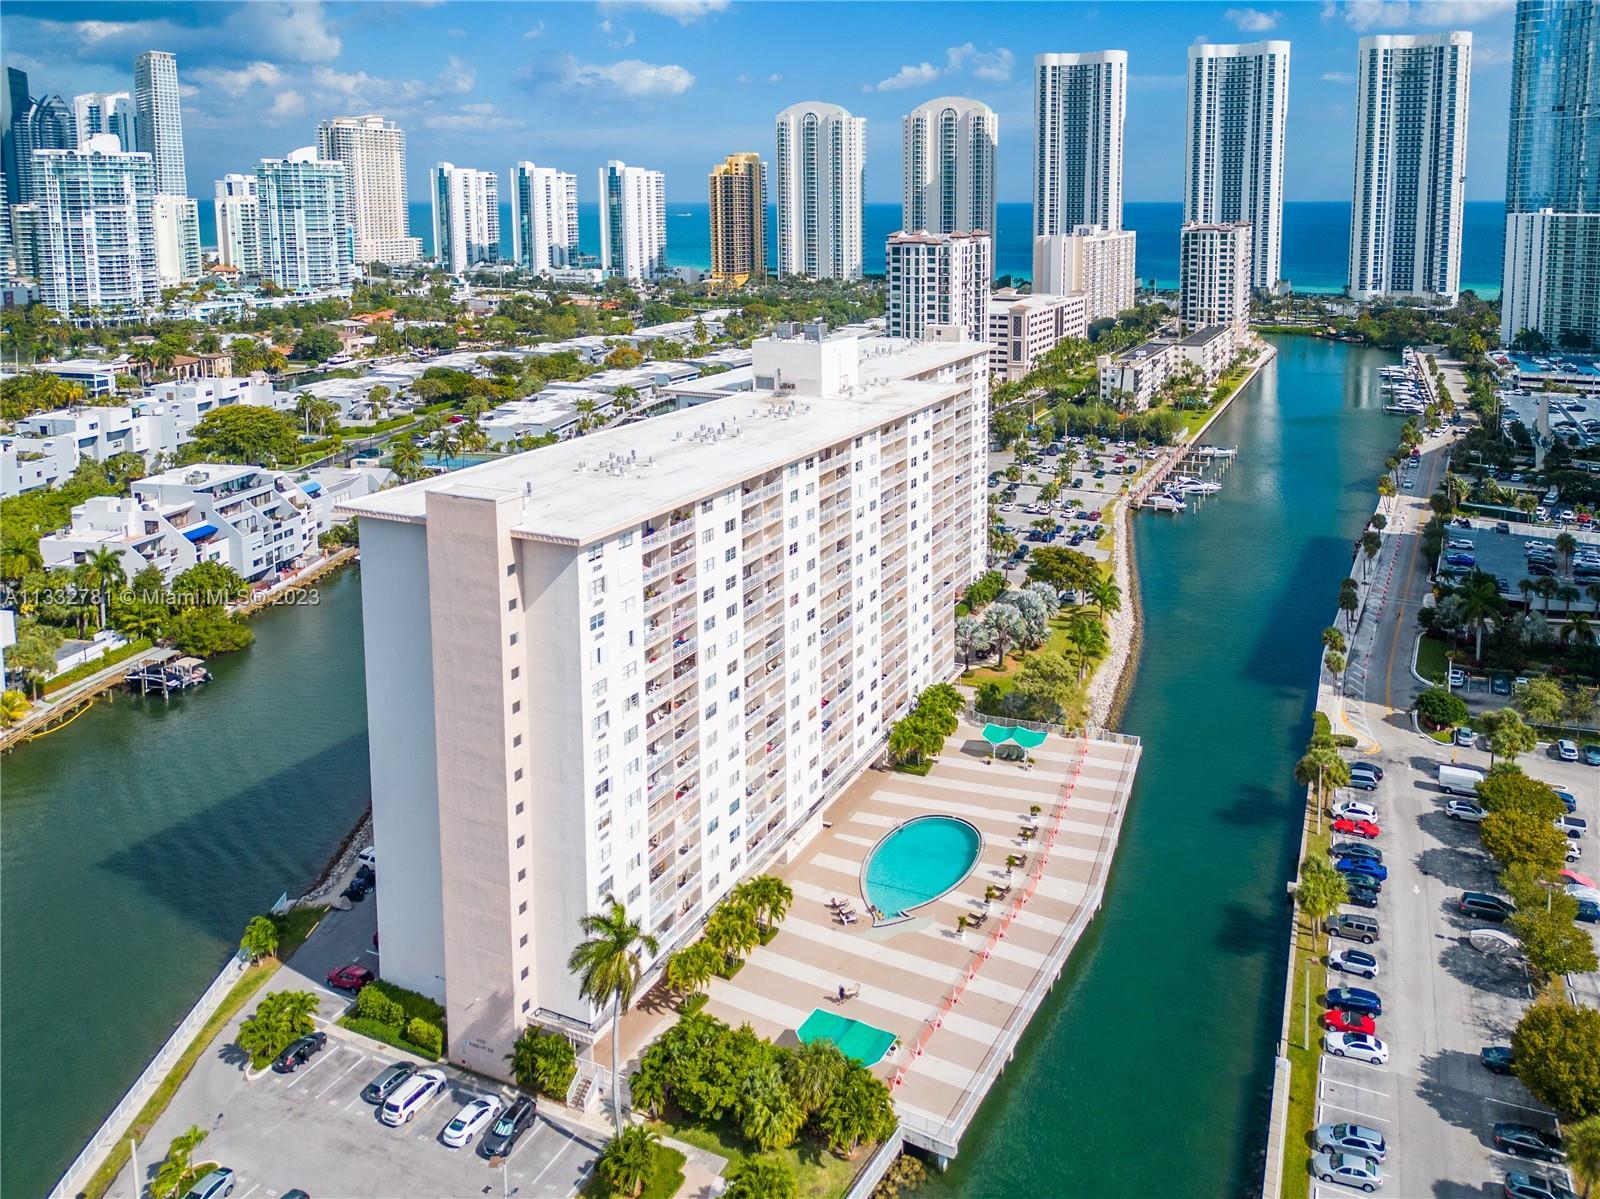 Come to live your ideal Florida Vacation in the heart of Sunny Isles surrounded by MILLION DOLLAR CO